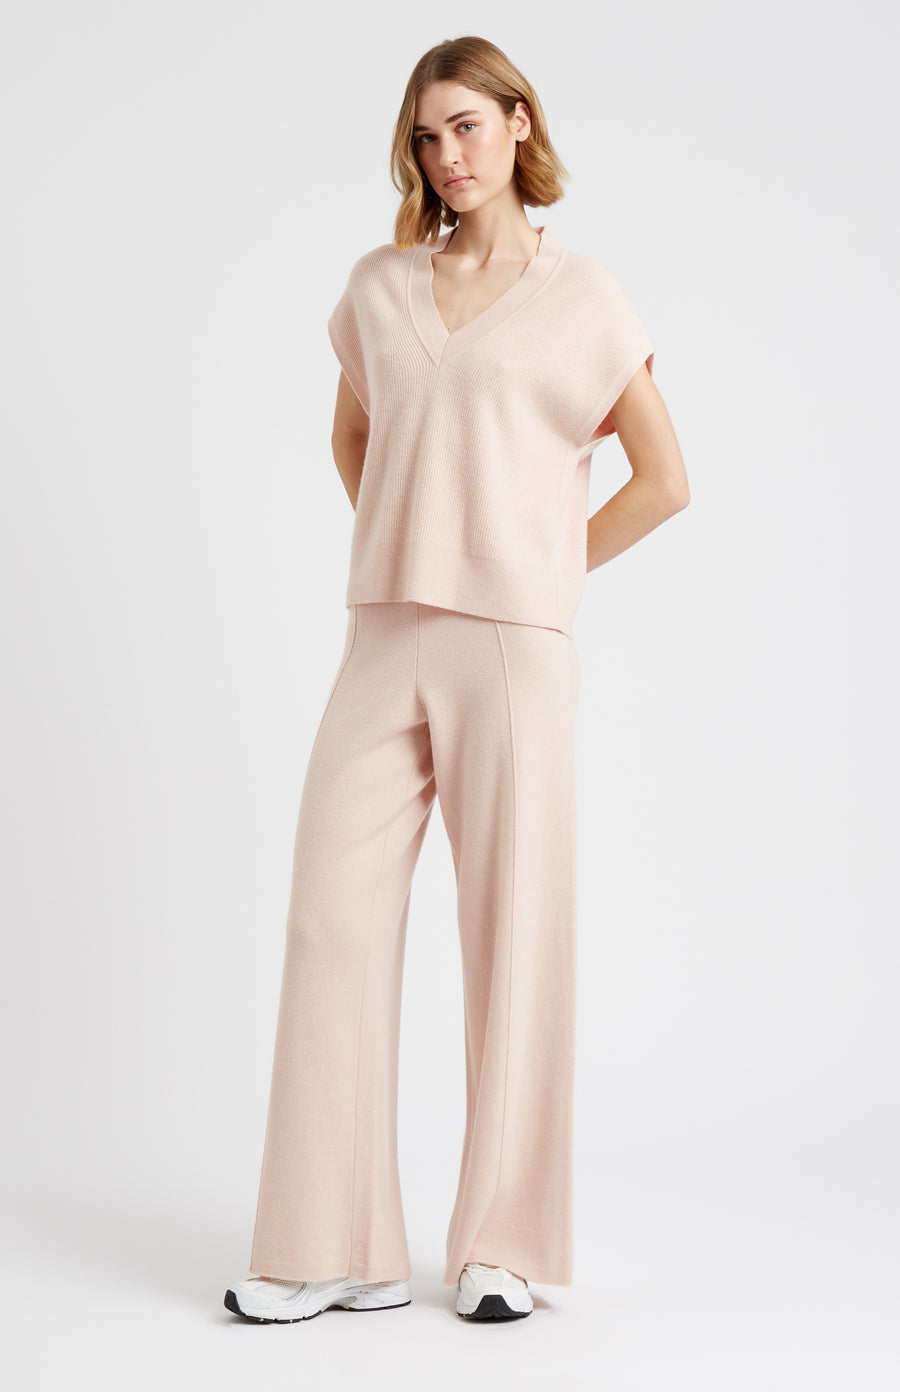 Pringle of Scotland V Neck Sleeveless cashmere blend jumper in Pink Champagne with matching trousers